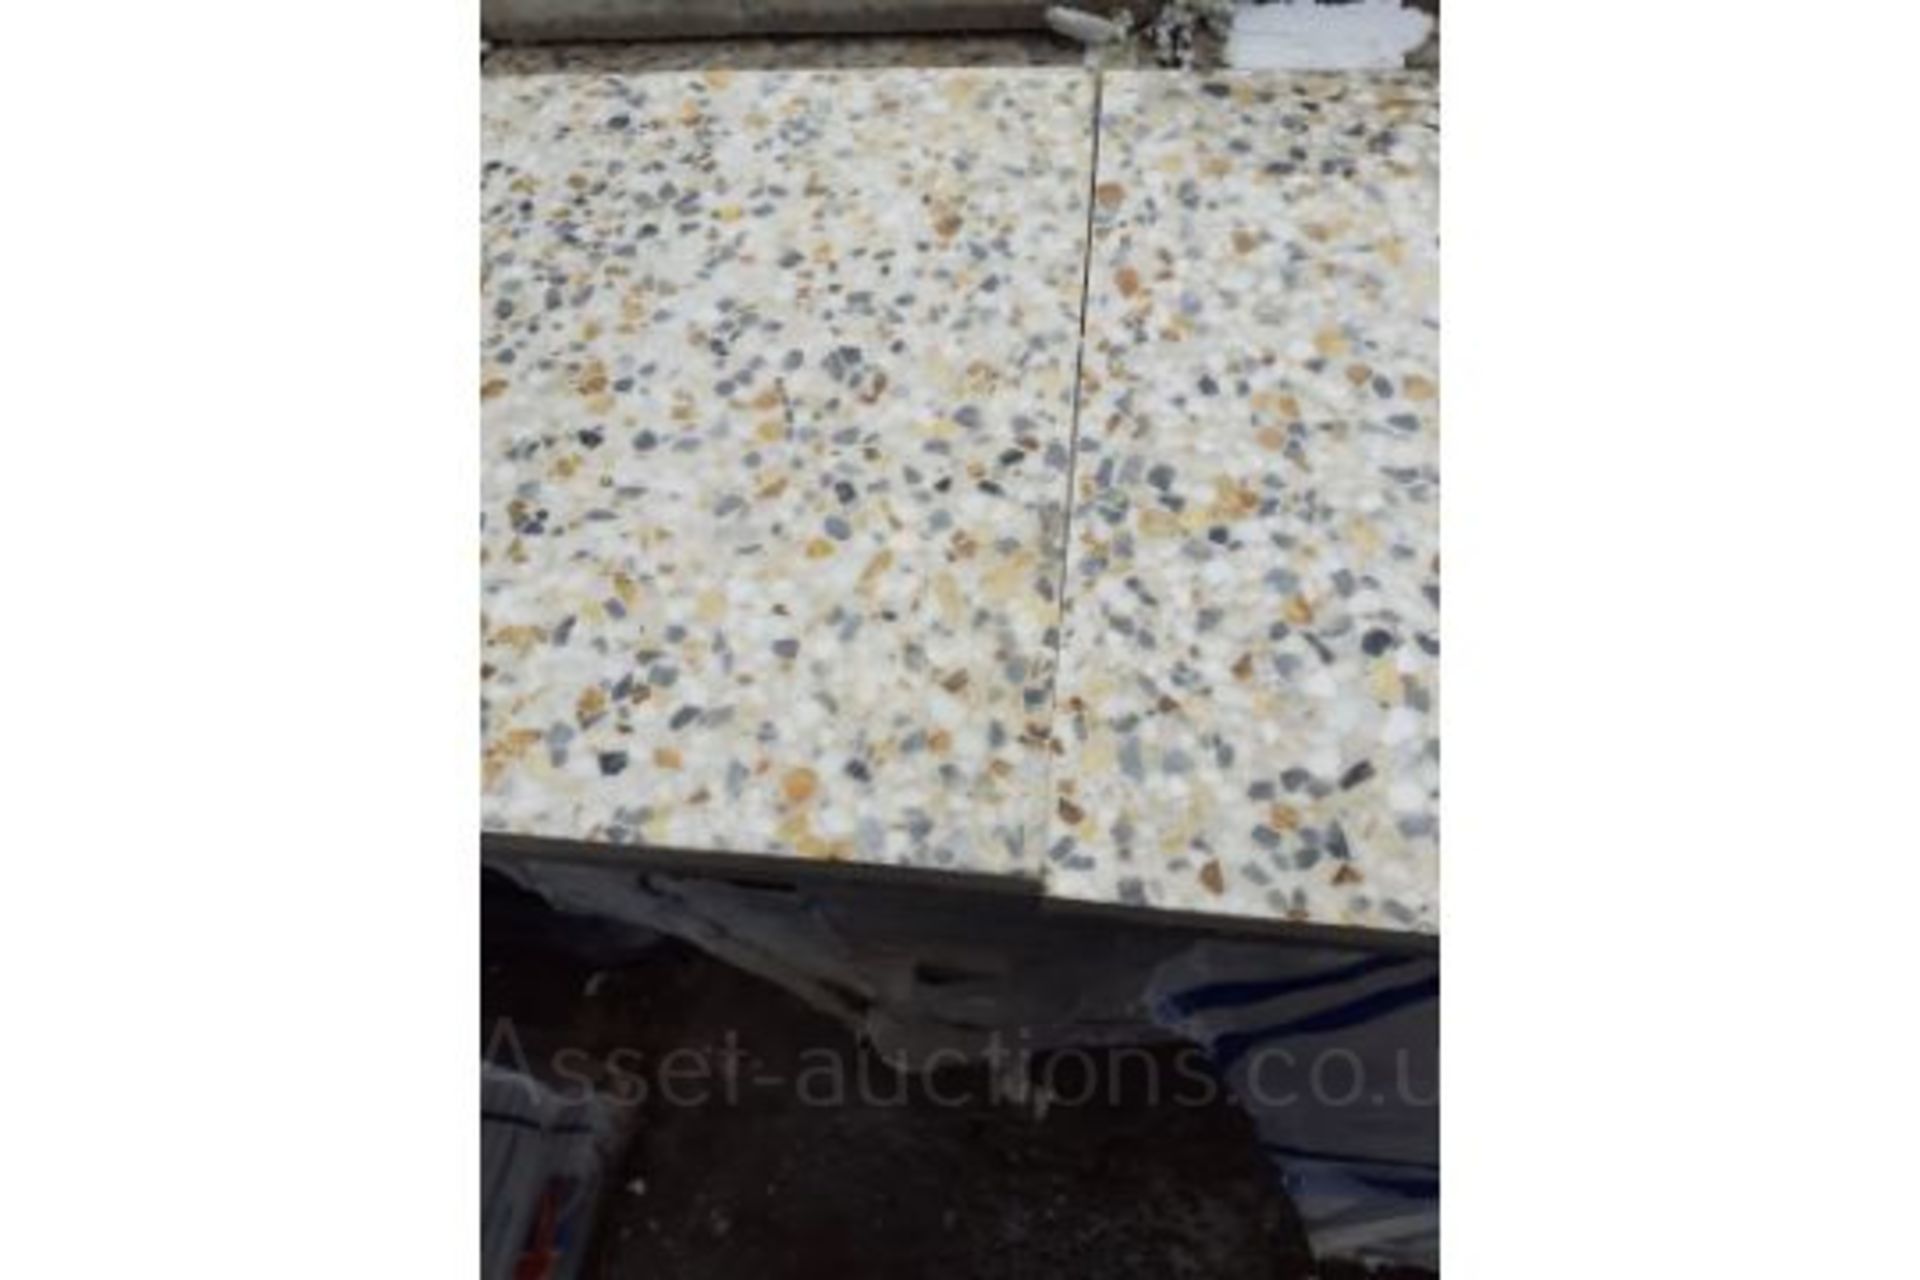 1 PALLET OF BRAND NEW TERRAZZO COMMERCIAL FLOOR TILES (TDE9), COVERS 24 SQUARE YARDS *PLUS VAT* - Image 2 of 3